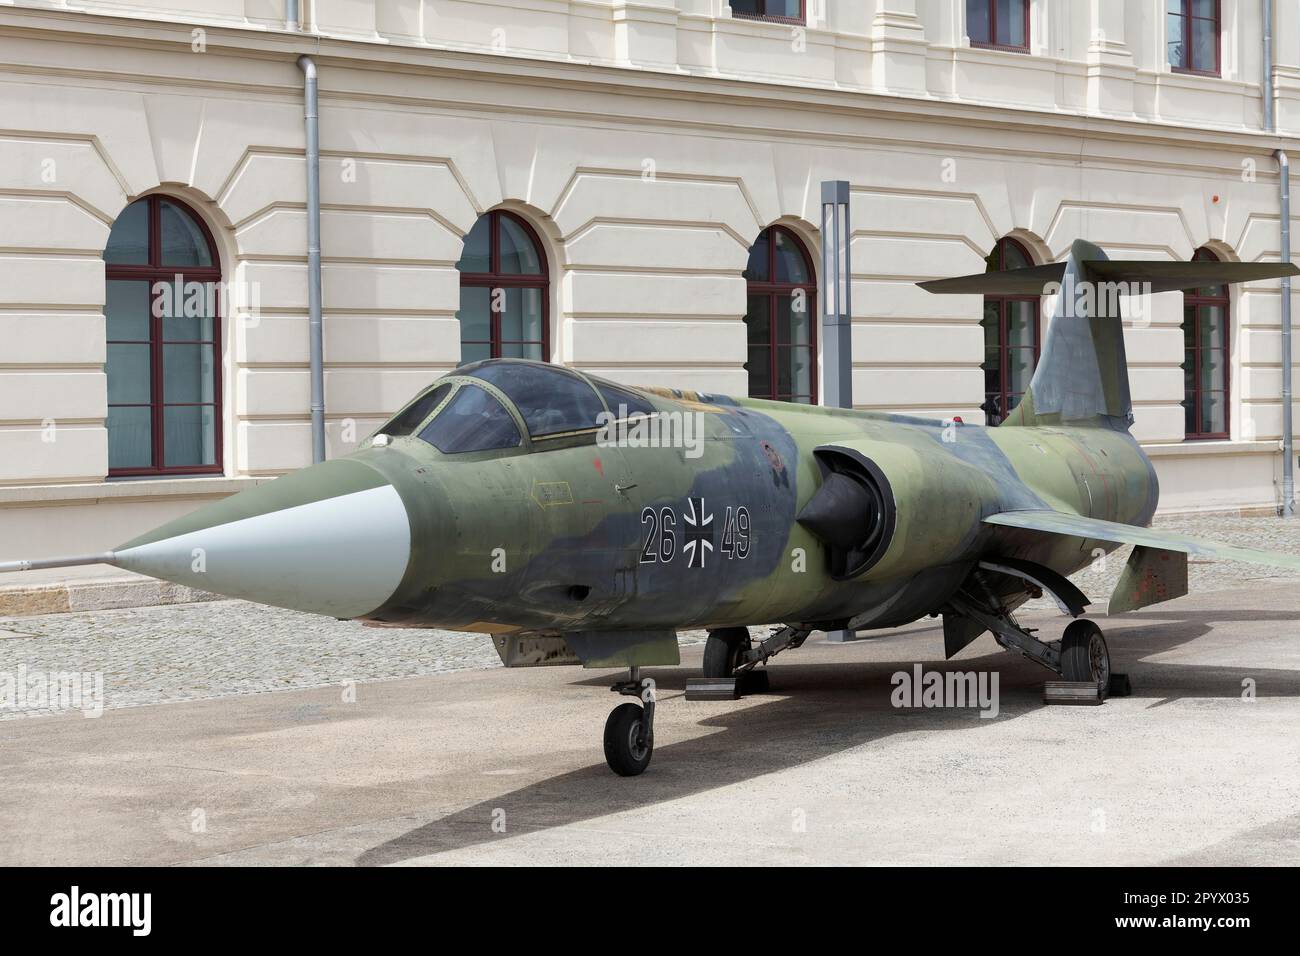 Lockheed F-104 Starfighter, single-engine fighter aircraft, Military History Museum of the German Armed Forces, Dresden, Saxony, Germany Stock Photo